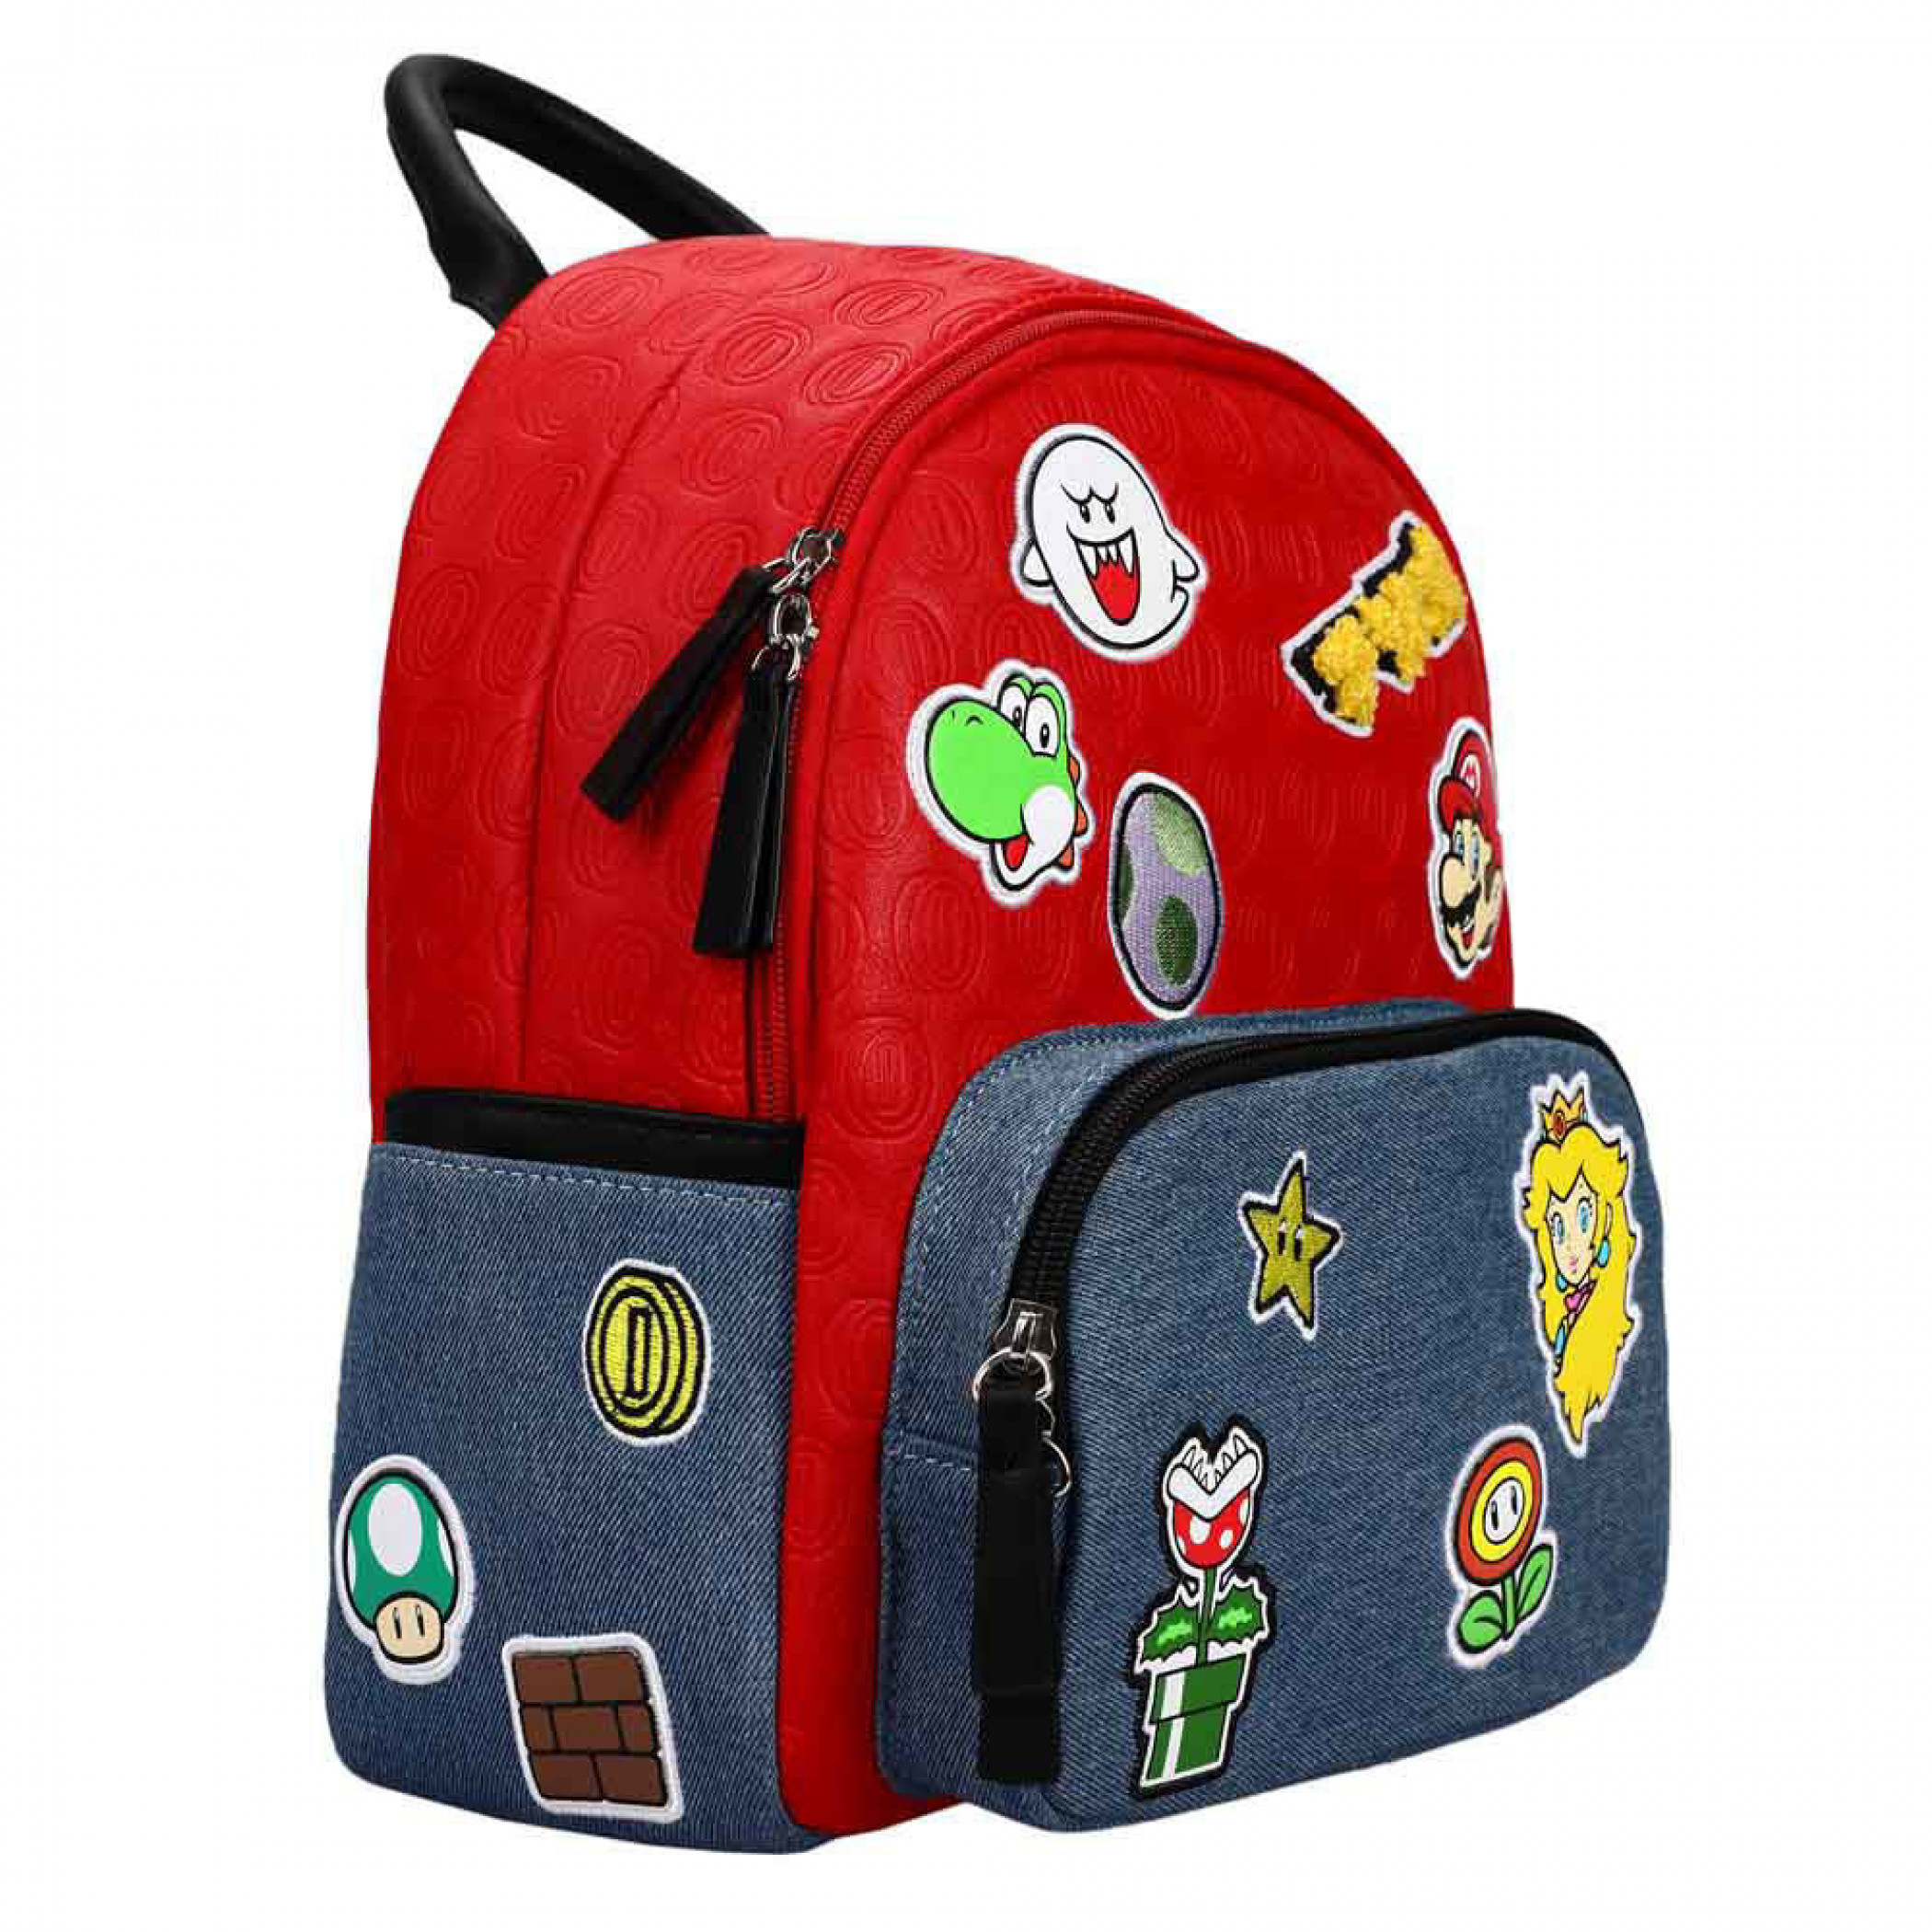 Super Mario Bros. Patch Collage 12" Backpack